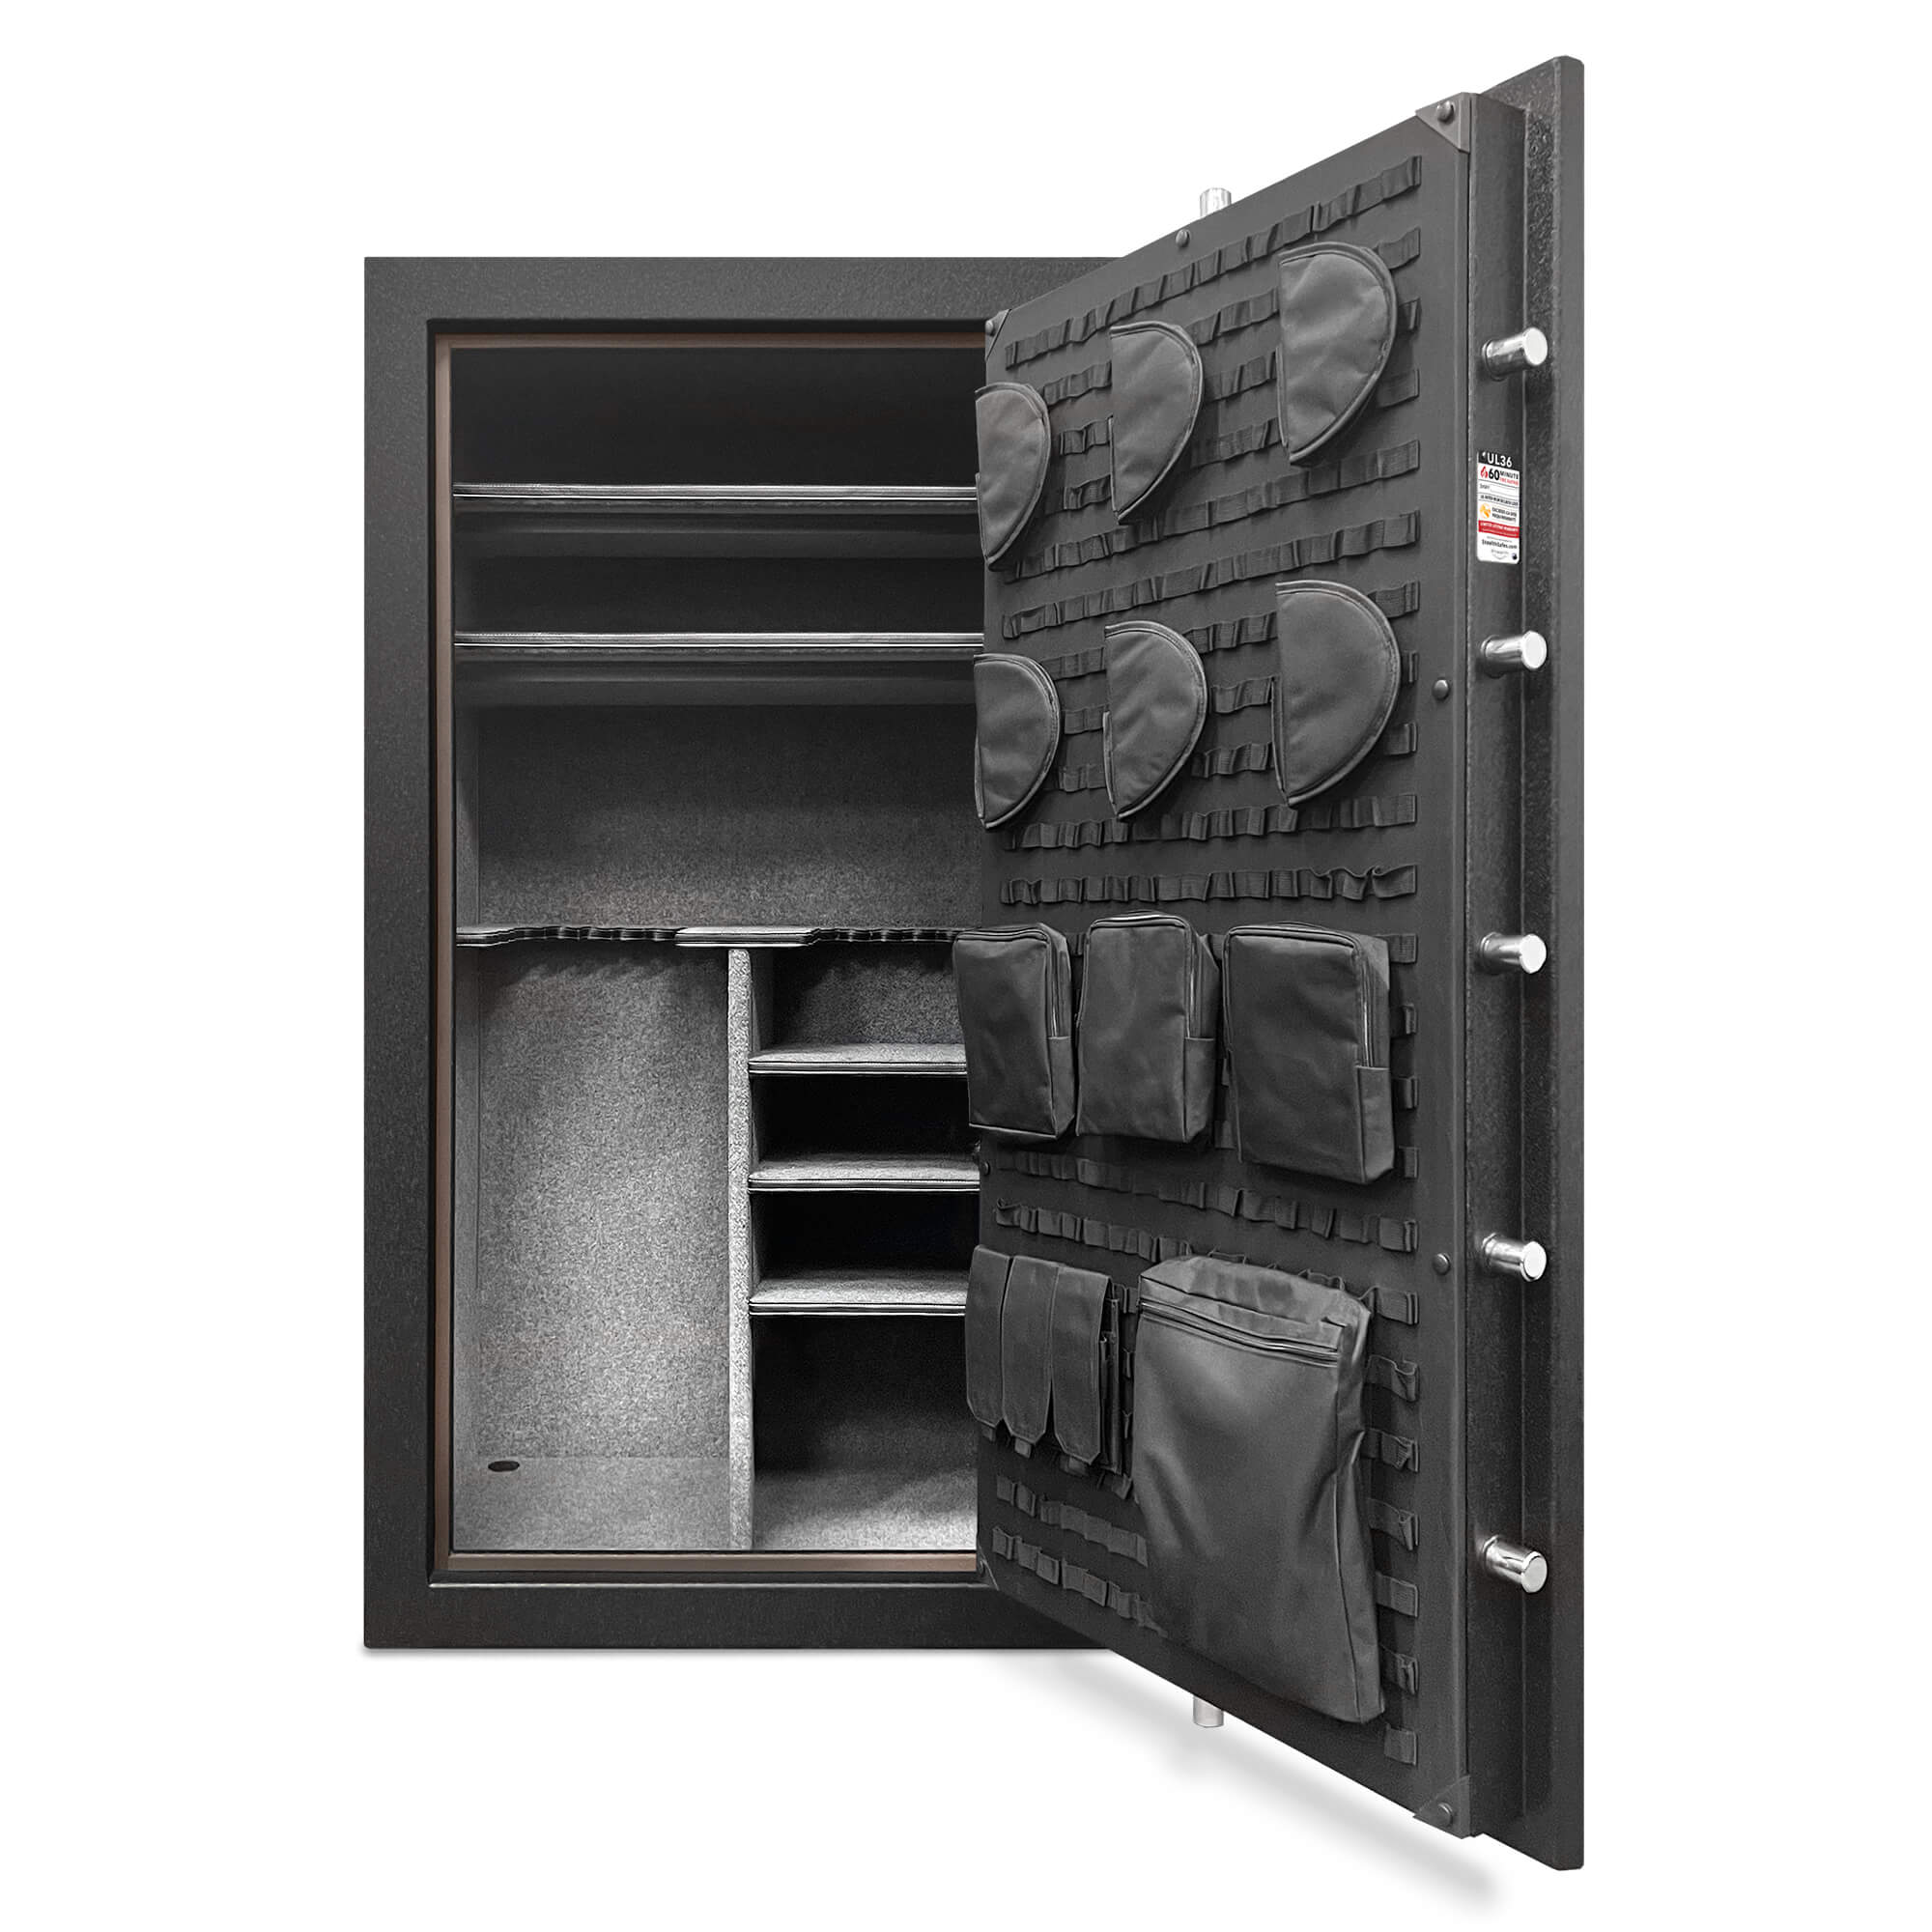 Stealth UL 36 | 1 hour Fire Protection | 66" x 36" x 29" | Liberty Safe Norcal.